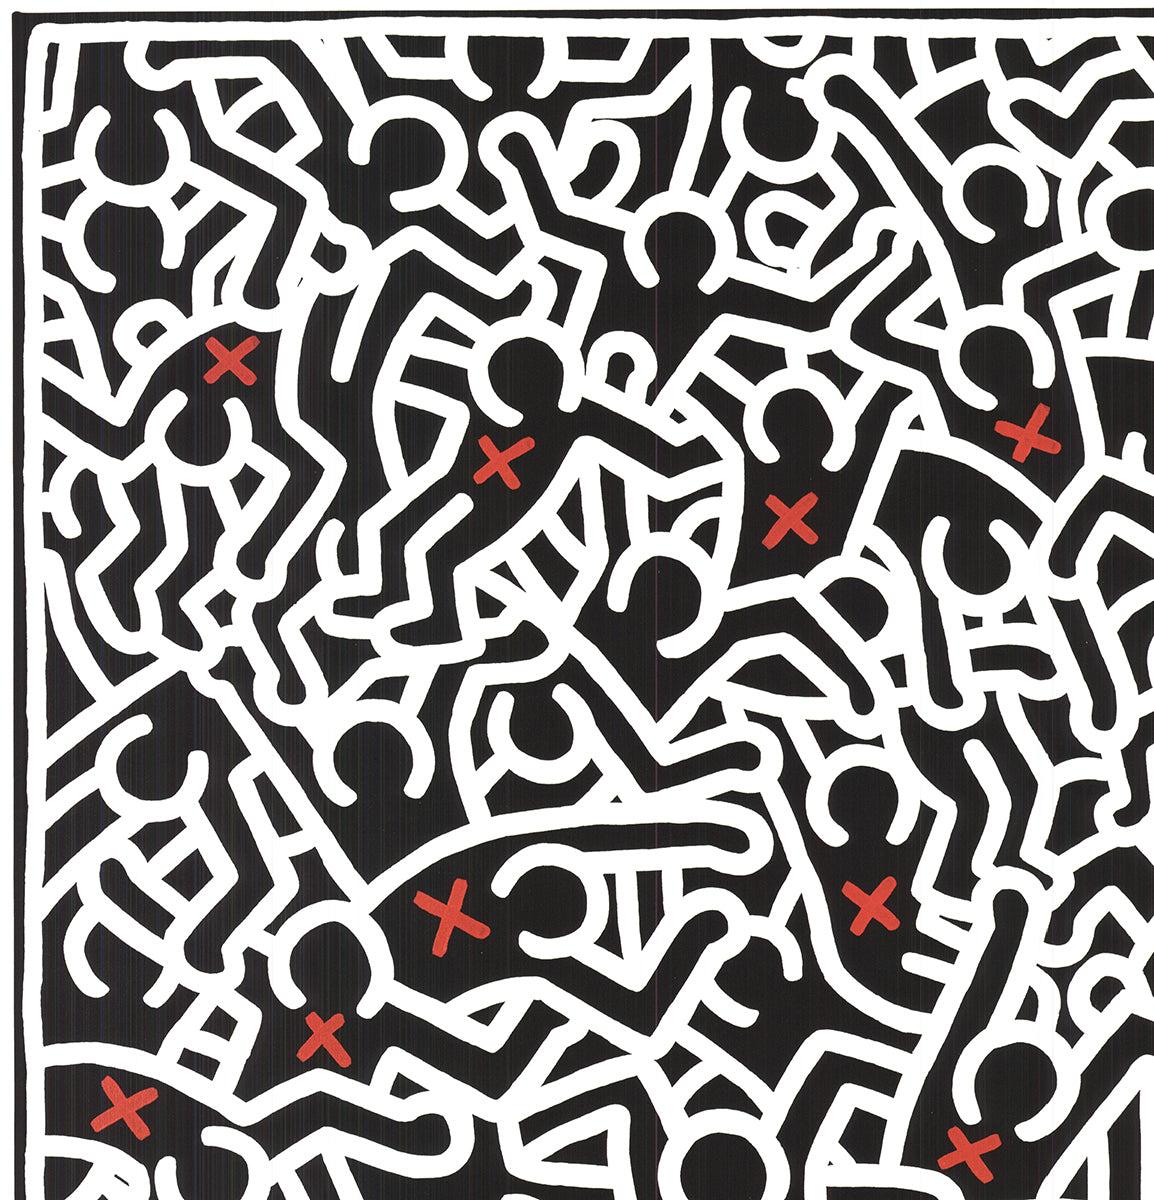 Keith Haring « Untitled, 1985 » 2009- Lithographie offset en vente 2